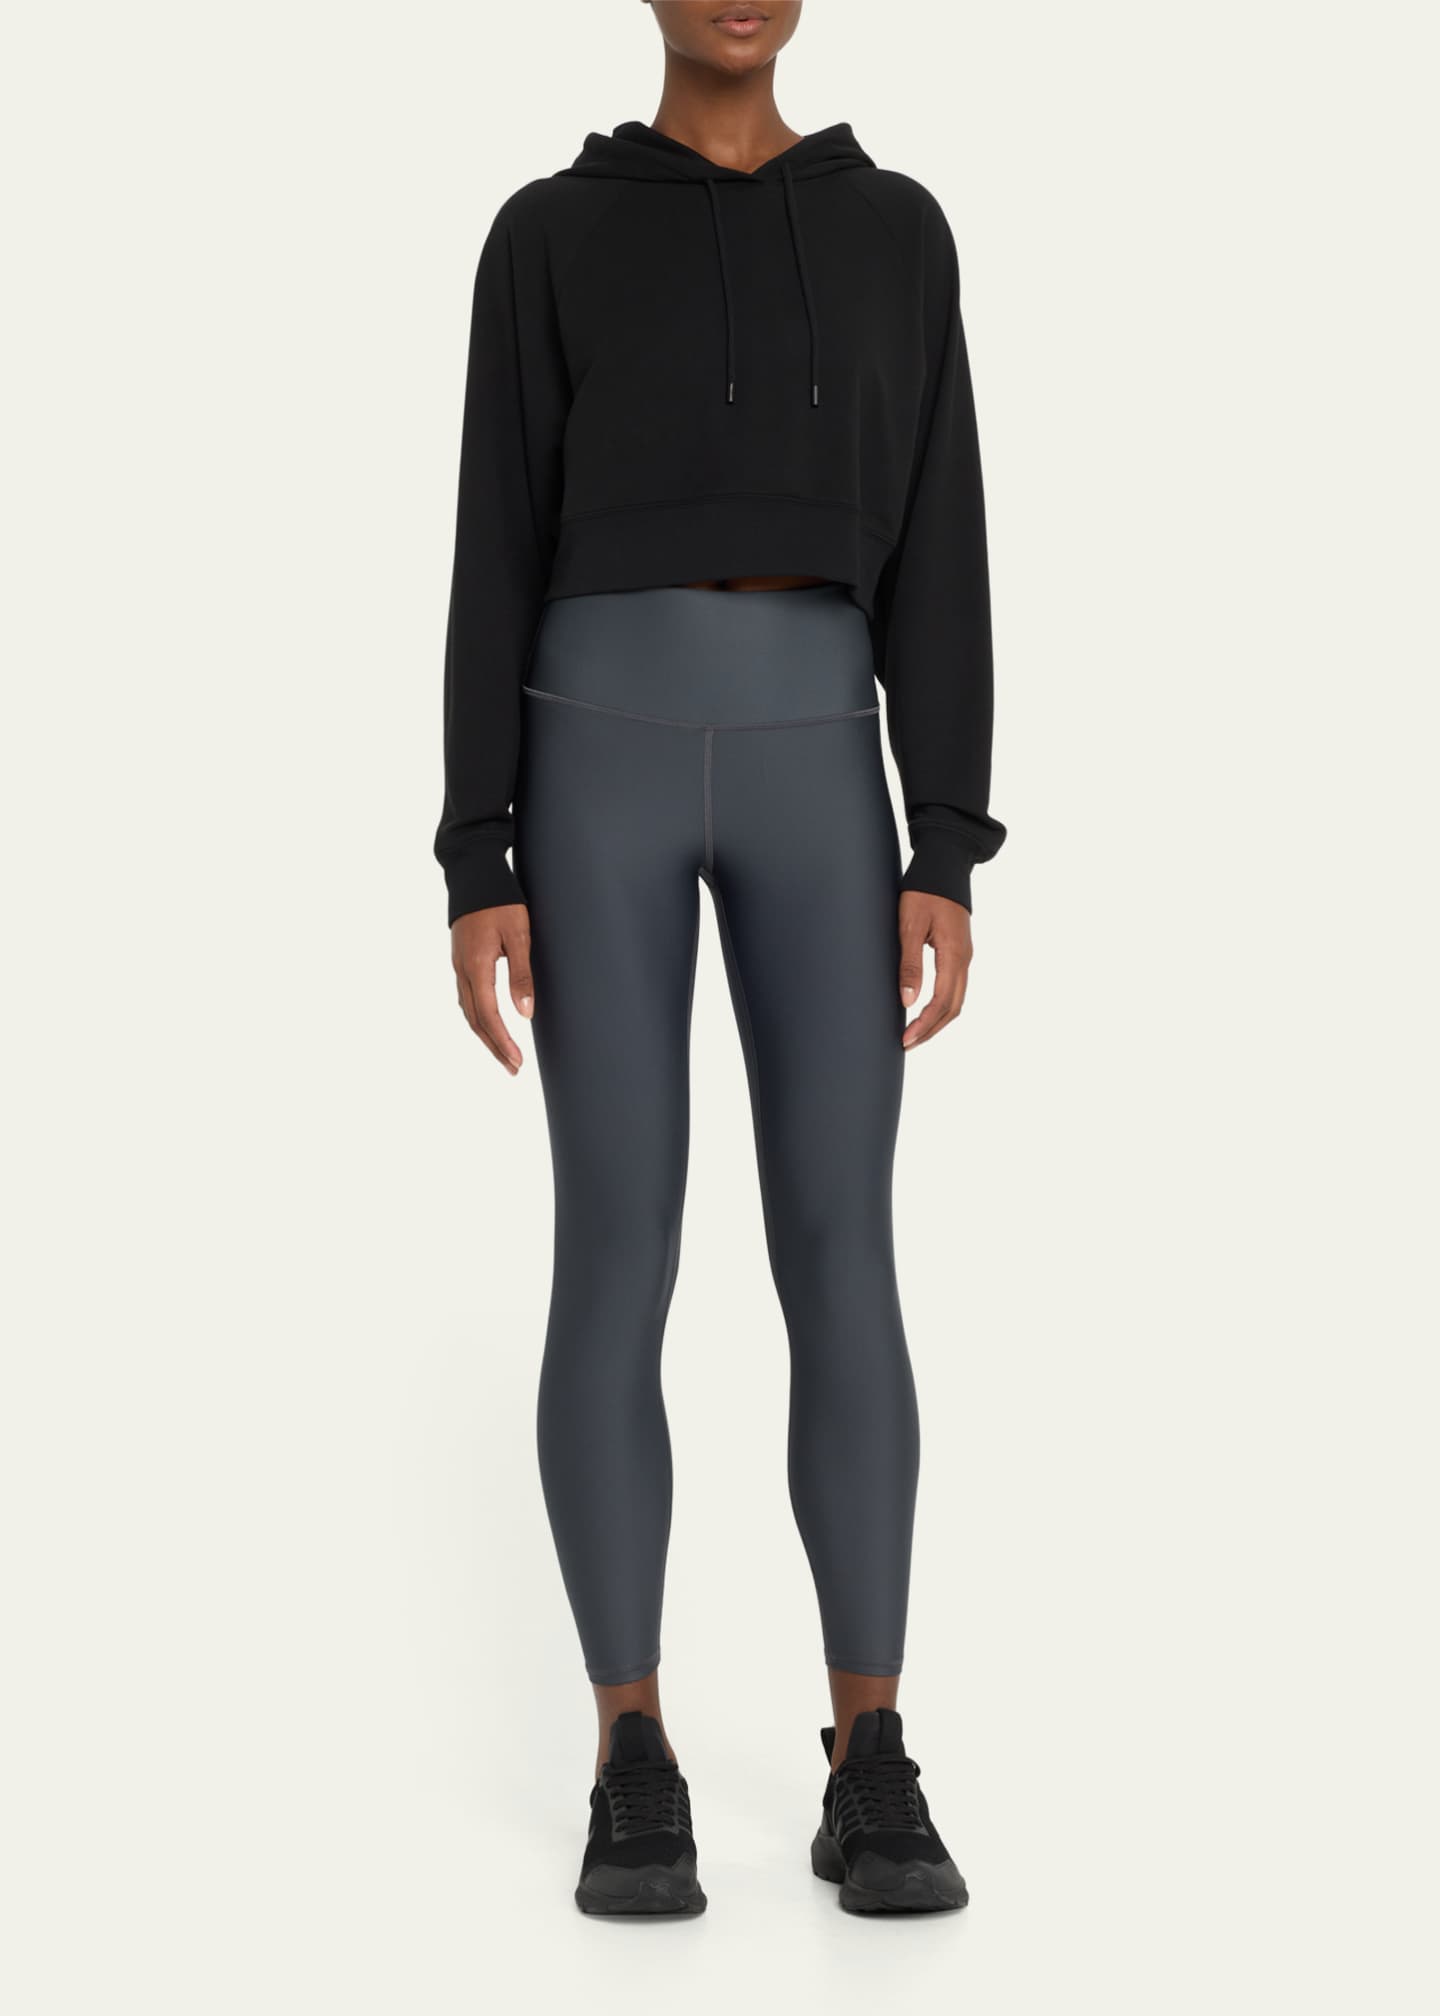 Alo Yoga Micro French Terry Double Take Cropped Hoodie - Bergdorf Goodman